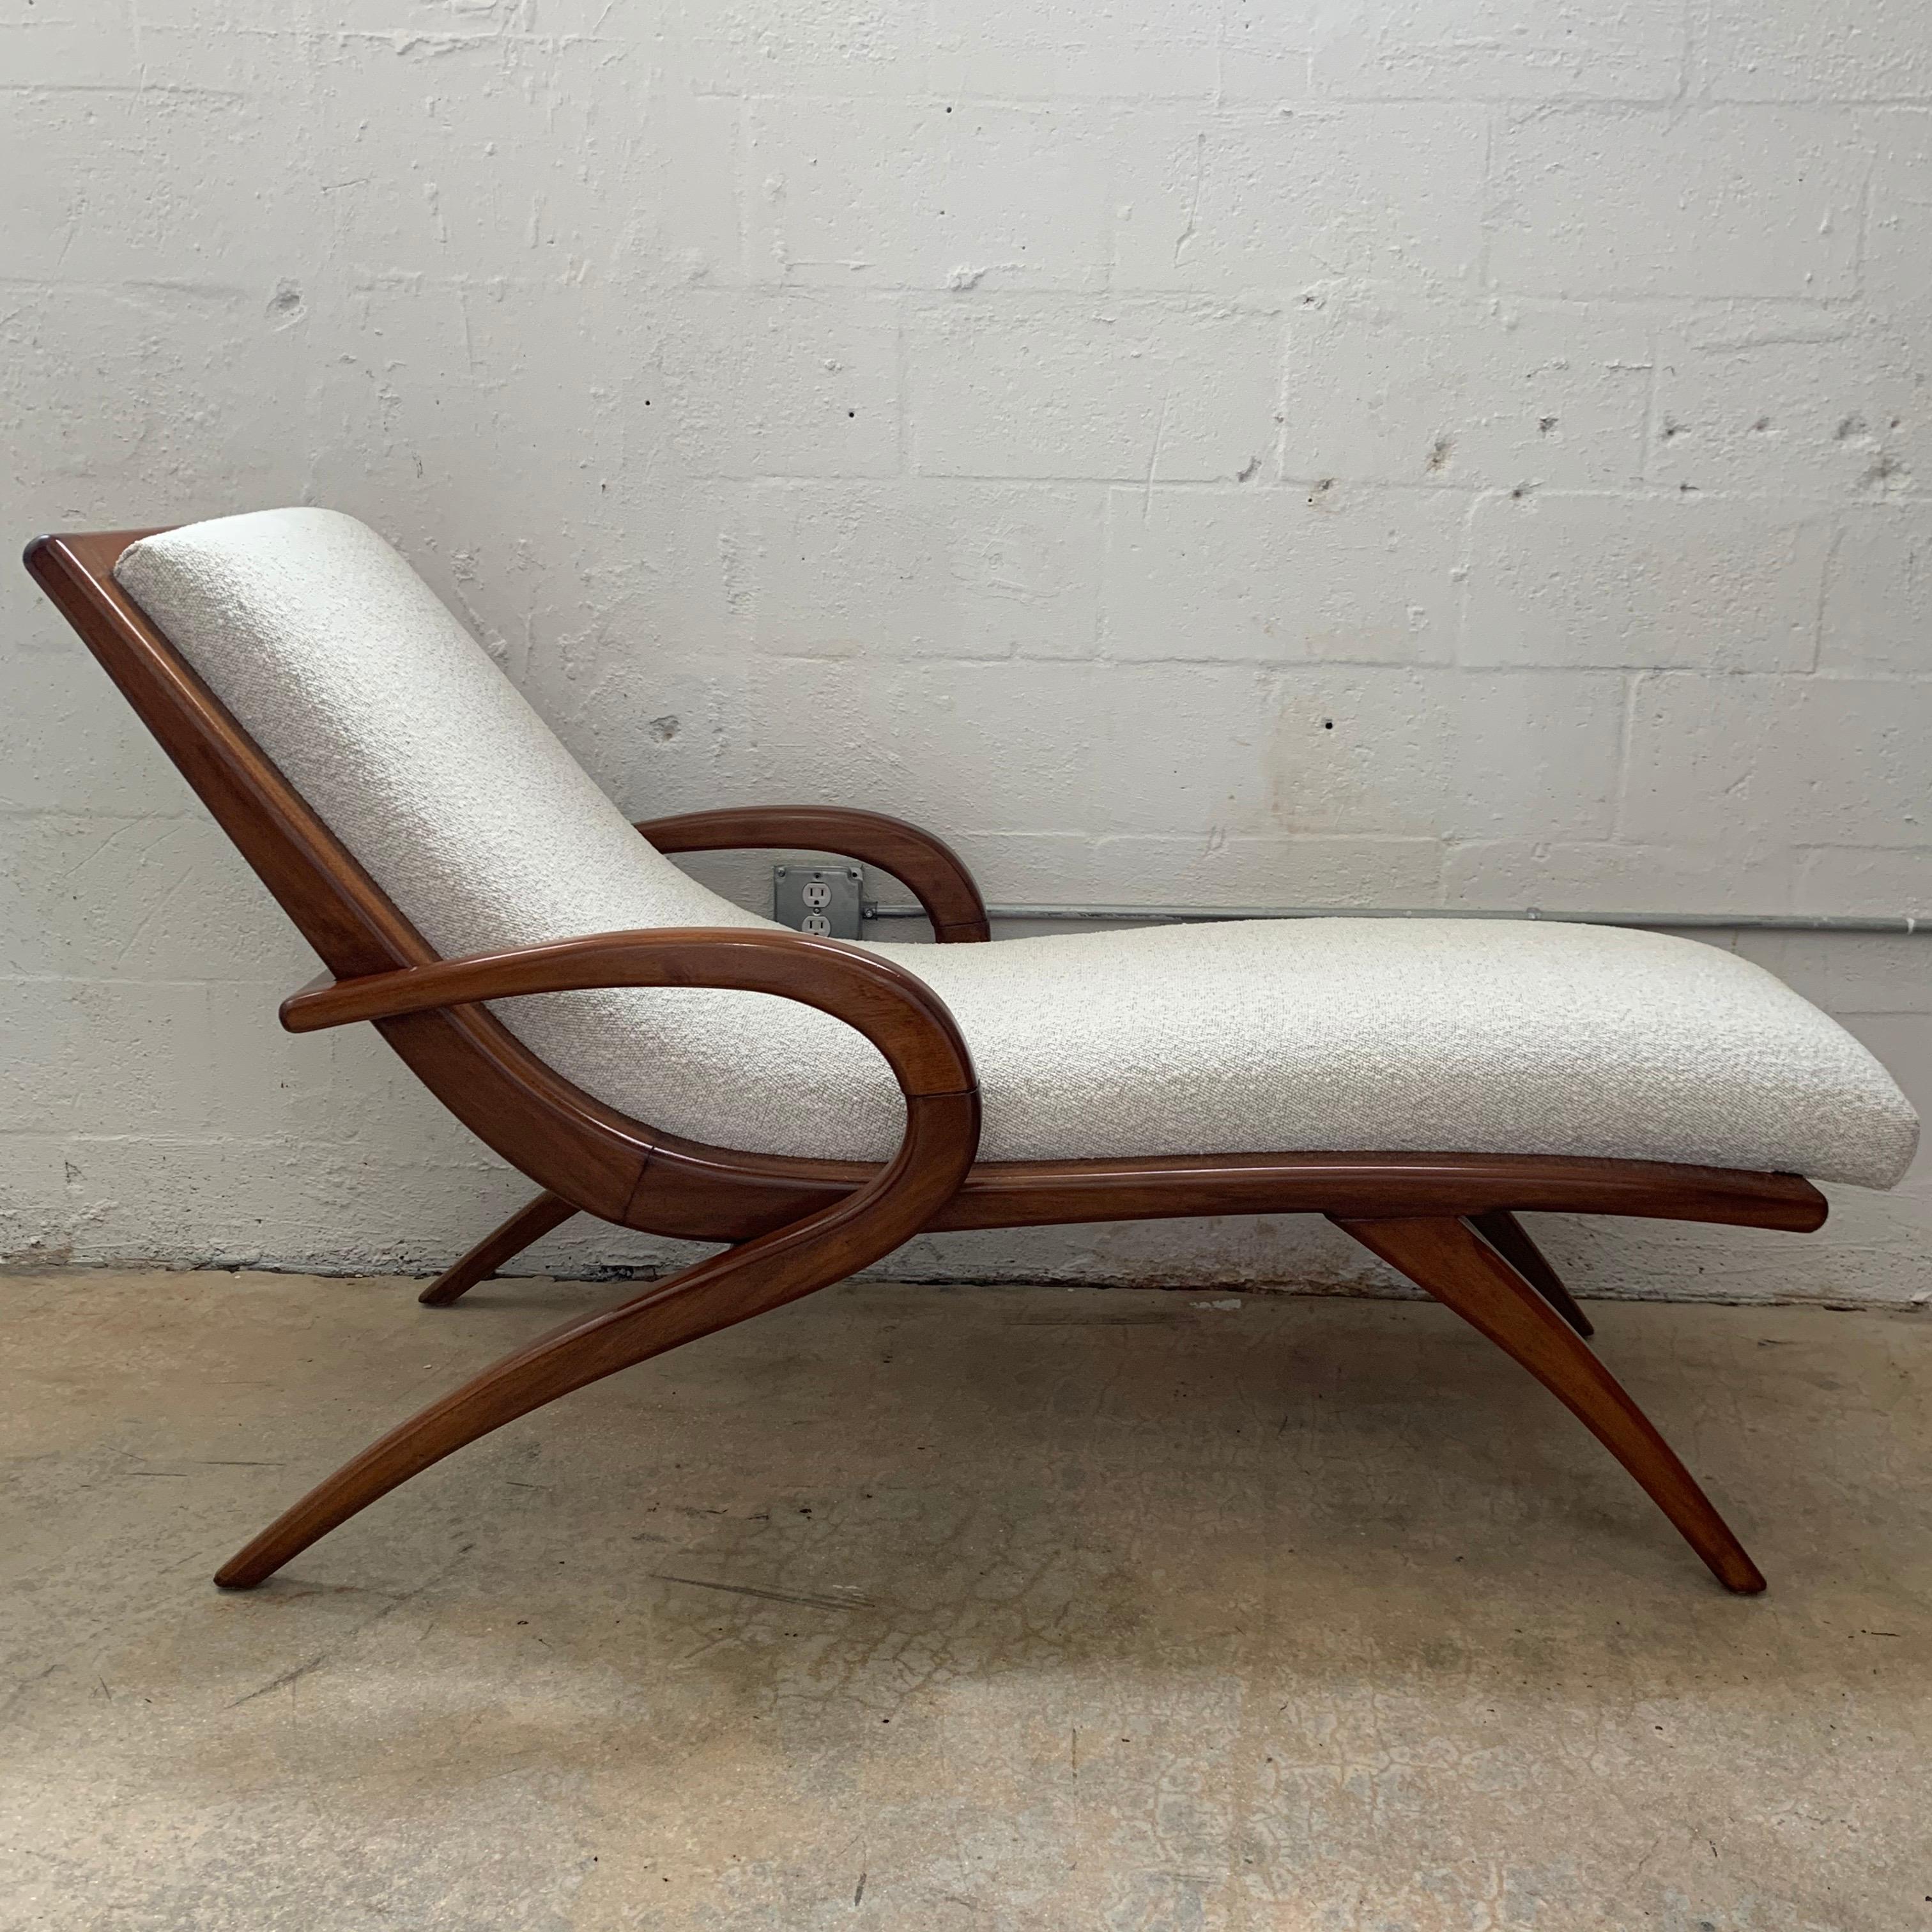 Polished Adrian Pearsall Walnut and Boucle Wave Chaise Lounge, USA, 1960s